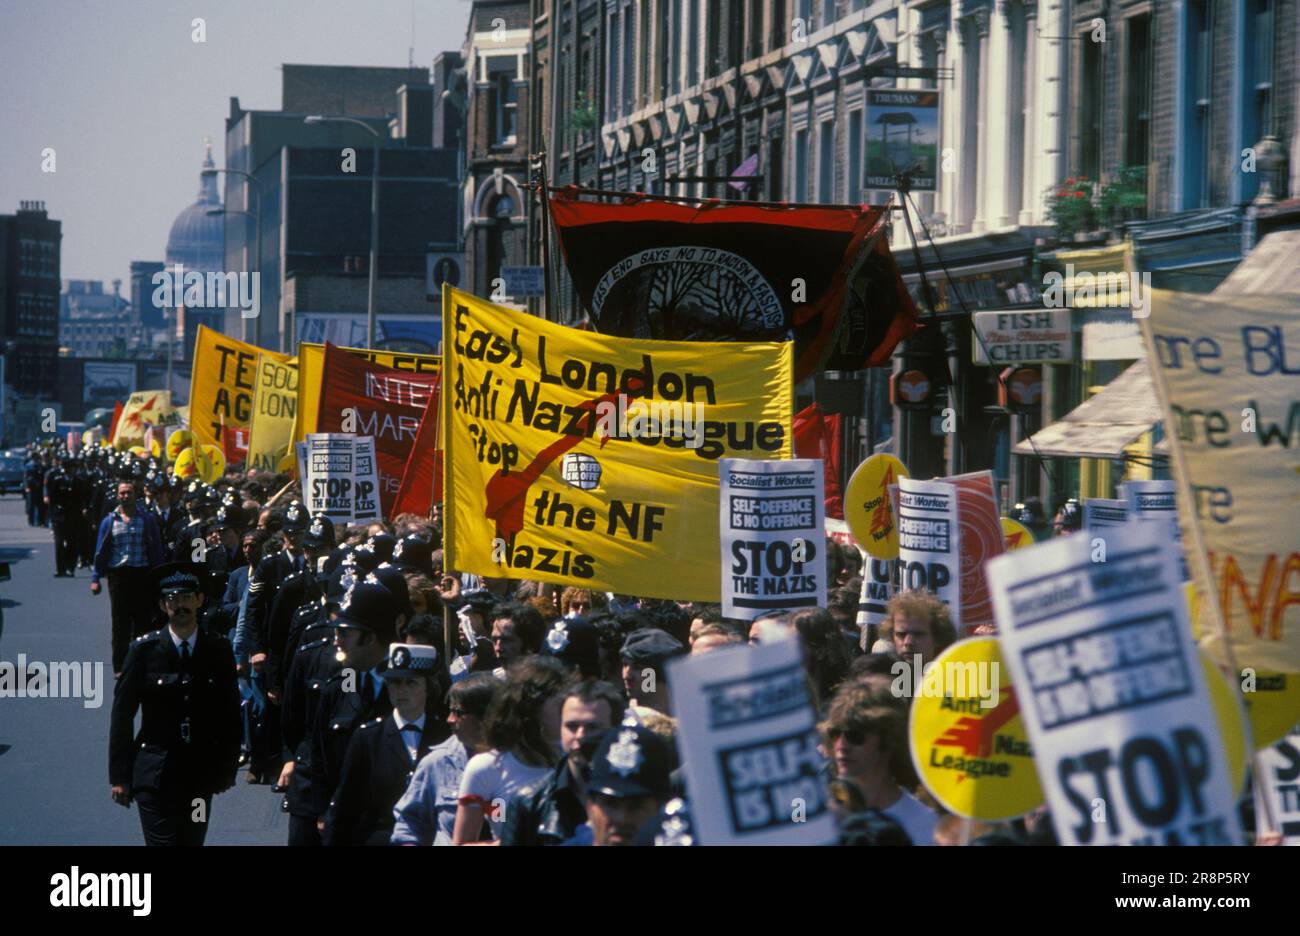 Anti Racism march through East London Anti Nazi League Stop the NF (National Front) banner demonstration against racism. St Paul's cathedral in background.  East London. England 1978. 1970s HOMER SYKES Stock Photo